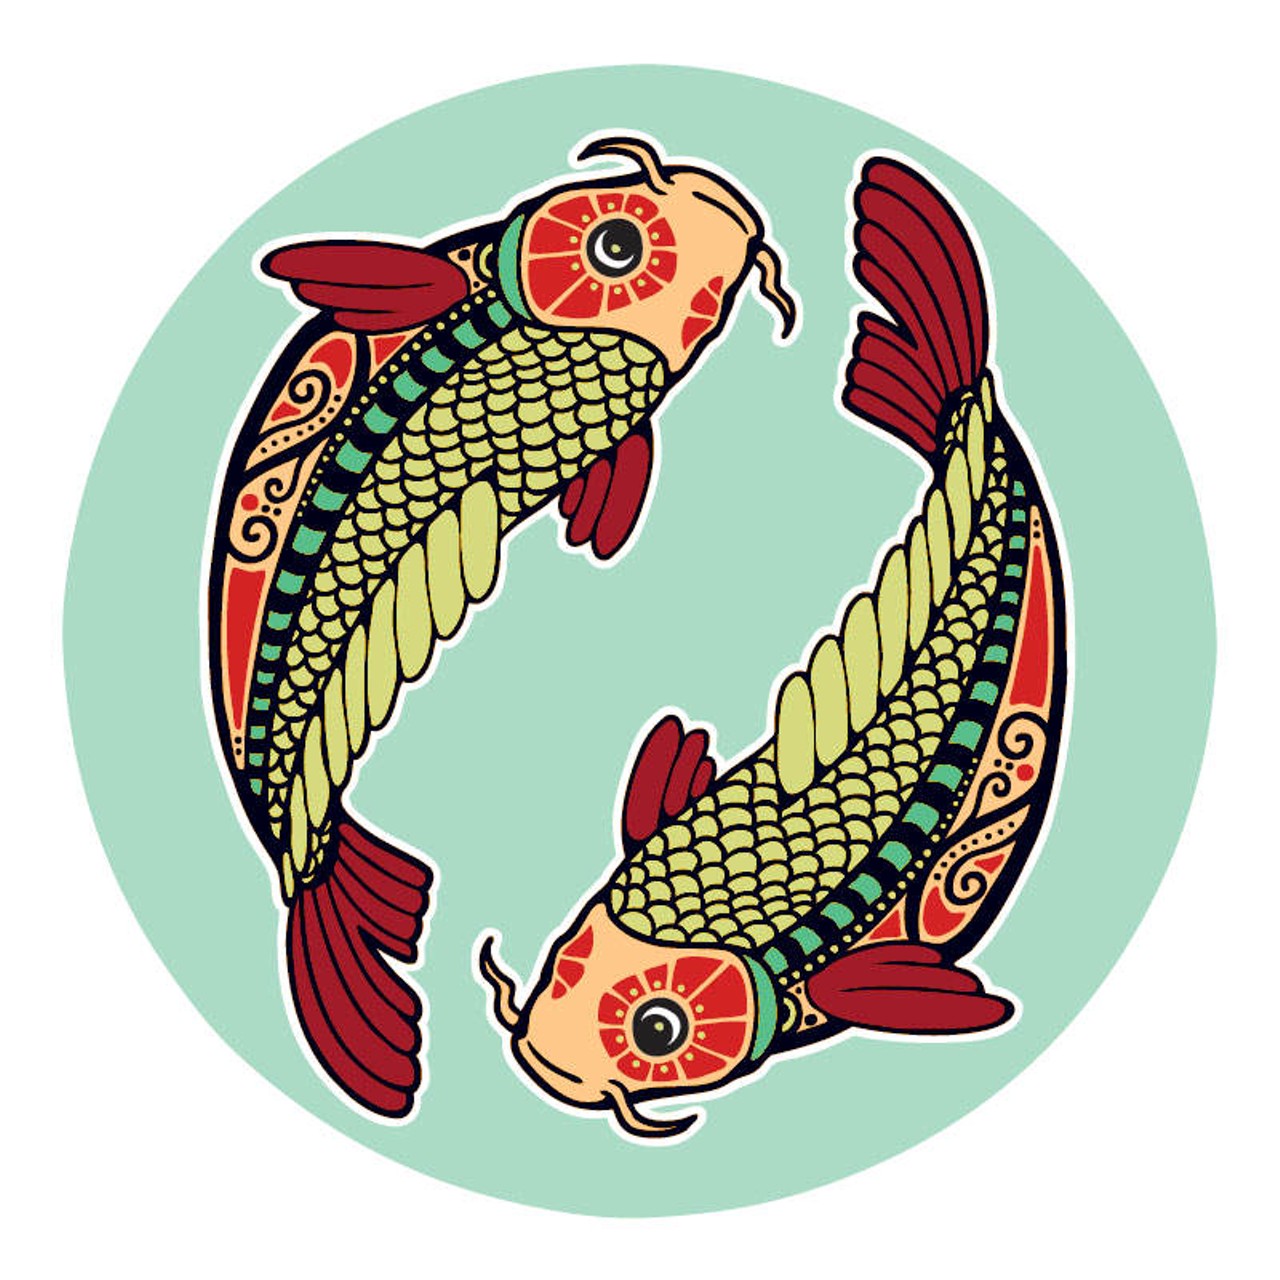 PISCES: Feb. 21 &#150; March 20
There are two versions of where you all are at. Some of you are right on the money, with enough sense to see, and read, the writing on the wall. In your case, your intuitive faculties are sharp as a tack and ready to carry you through the next round of changes on a slipstream of success. For others? Pisces is always subject to delusional forces that make it appear as if you've got it all figured out, when in fact you are totally out of touch. Be careful of the extent to which you are convinced you are right, and don't assume that outer success implies that you are safe and secure.